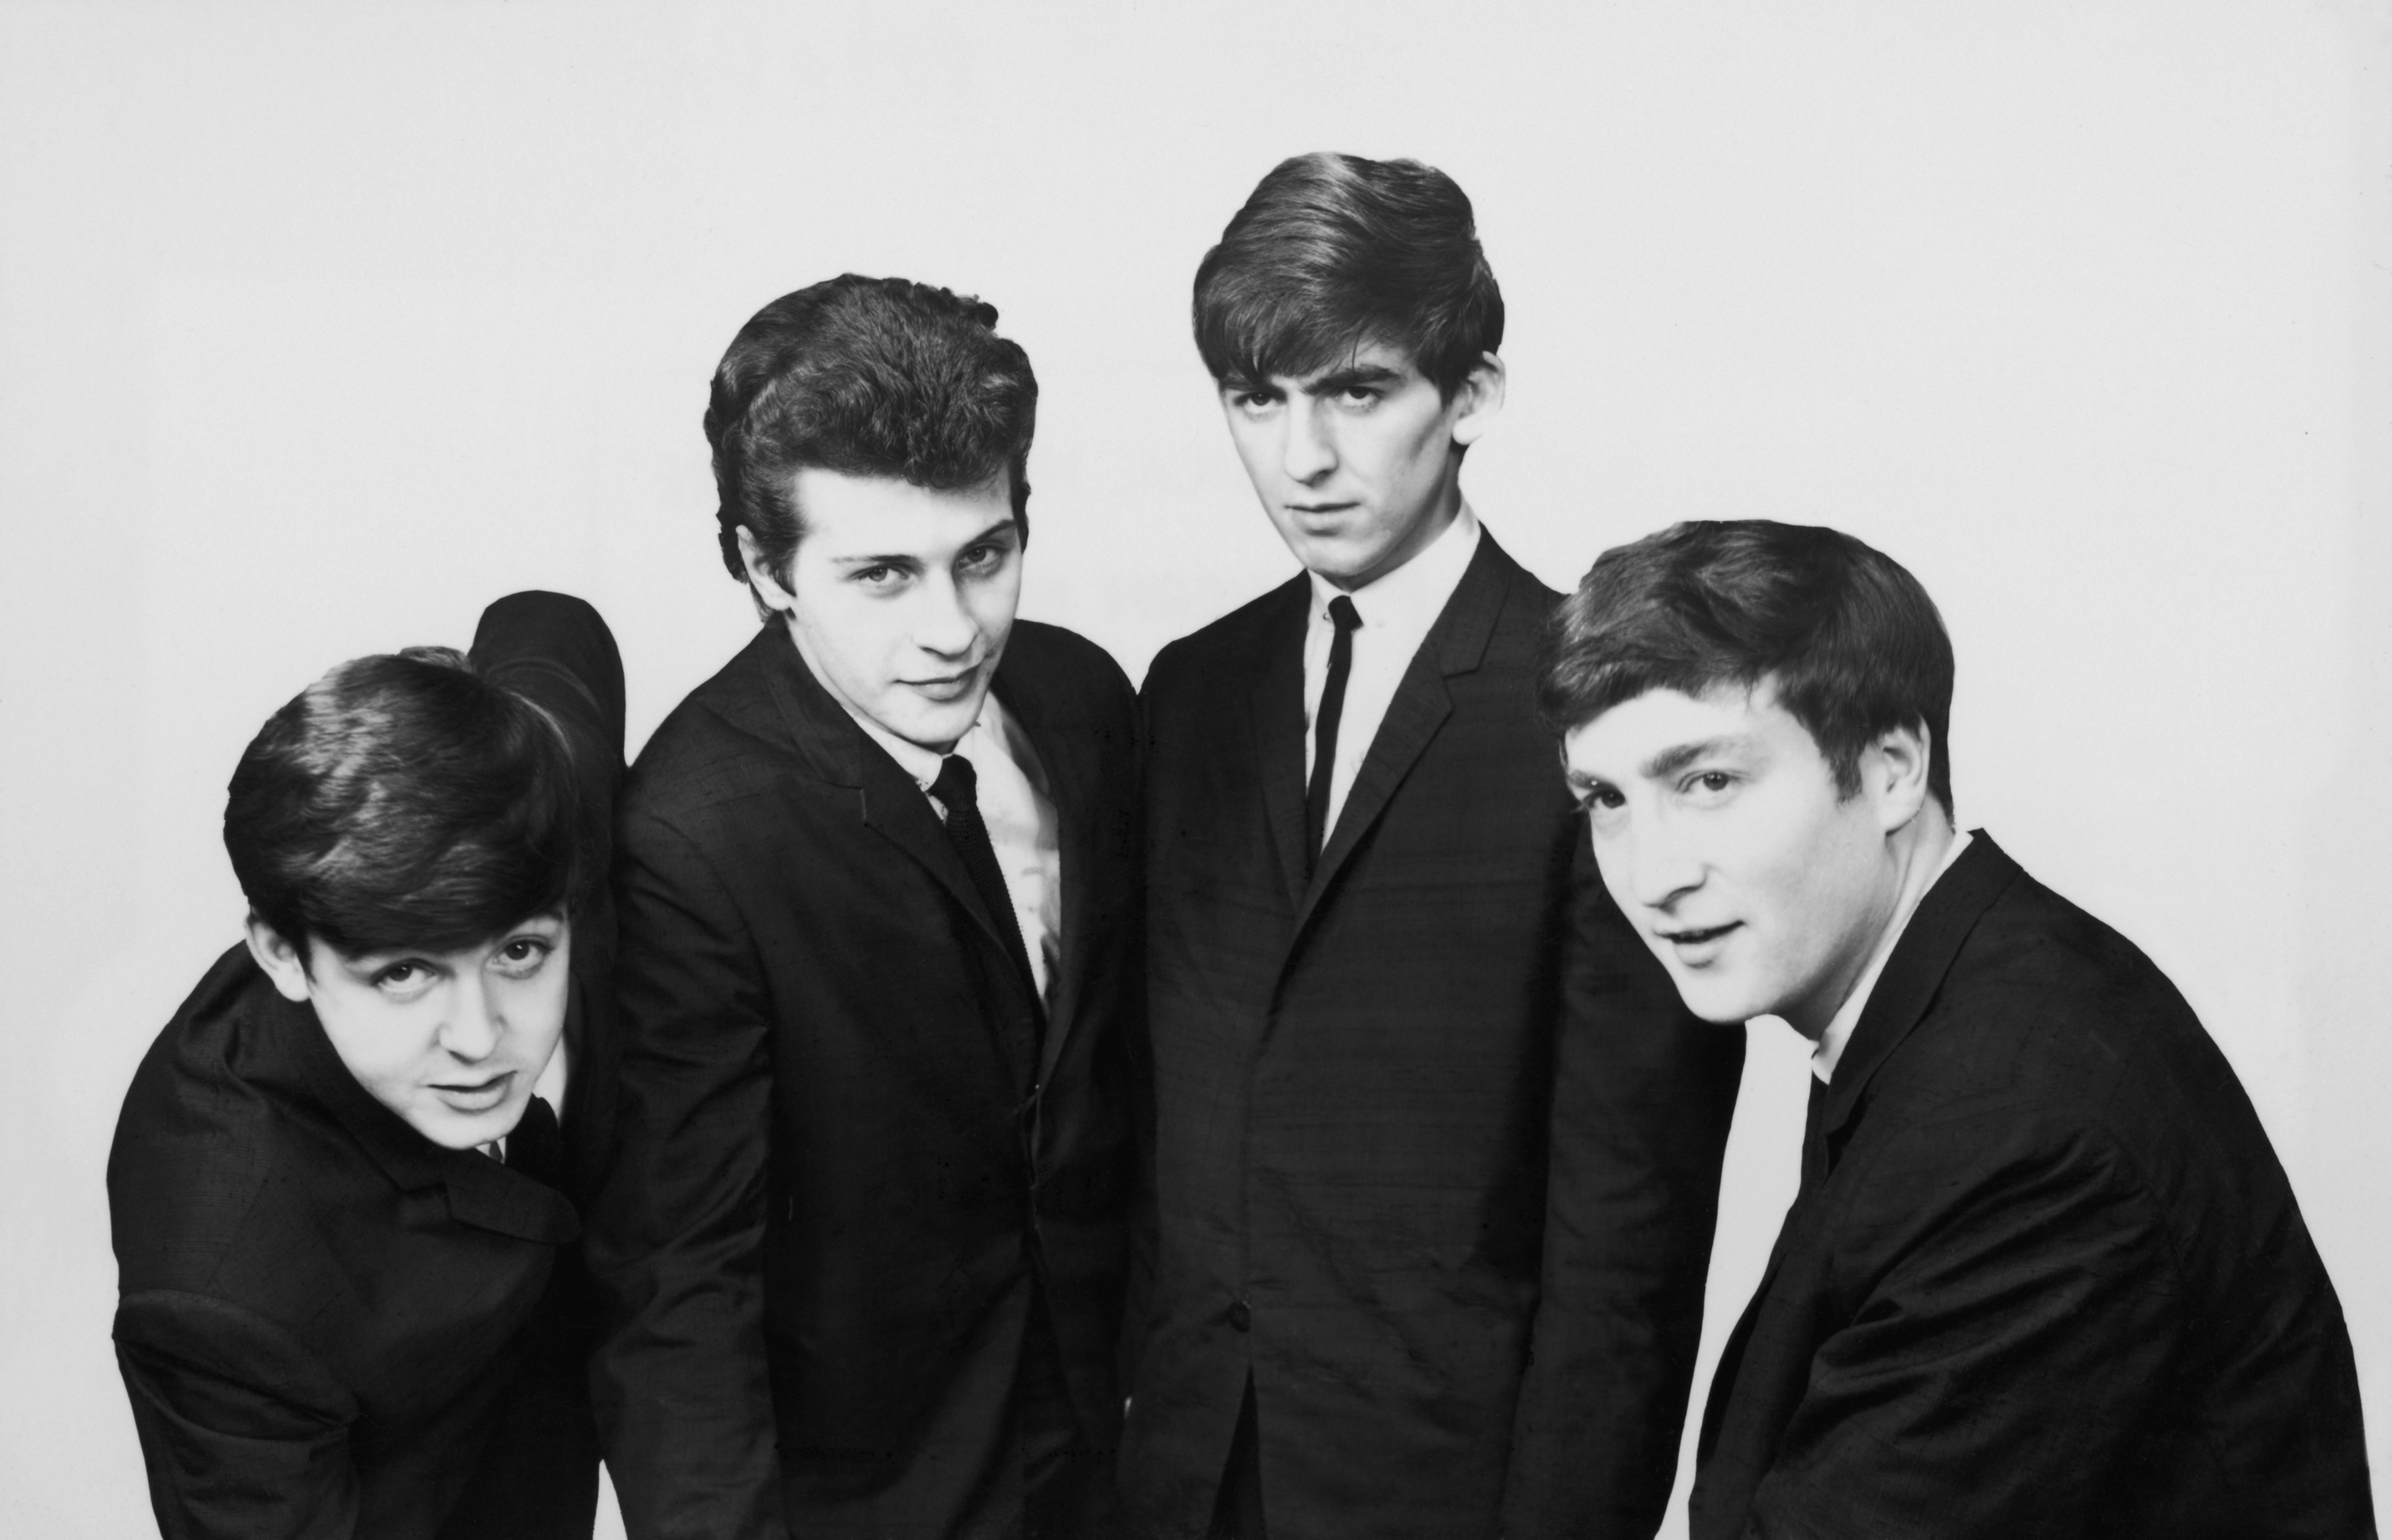 An early portrait of The Beatles. (Hulton Archive/Getty Images)